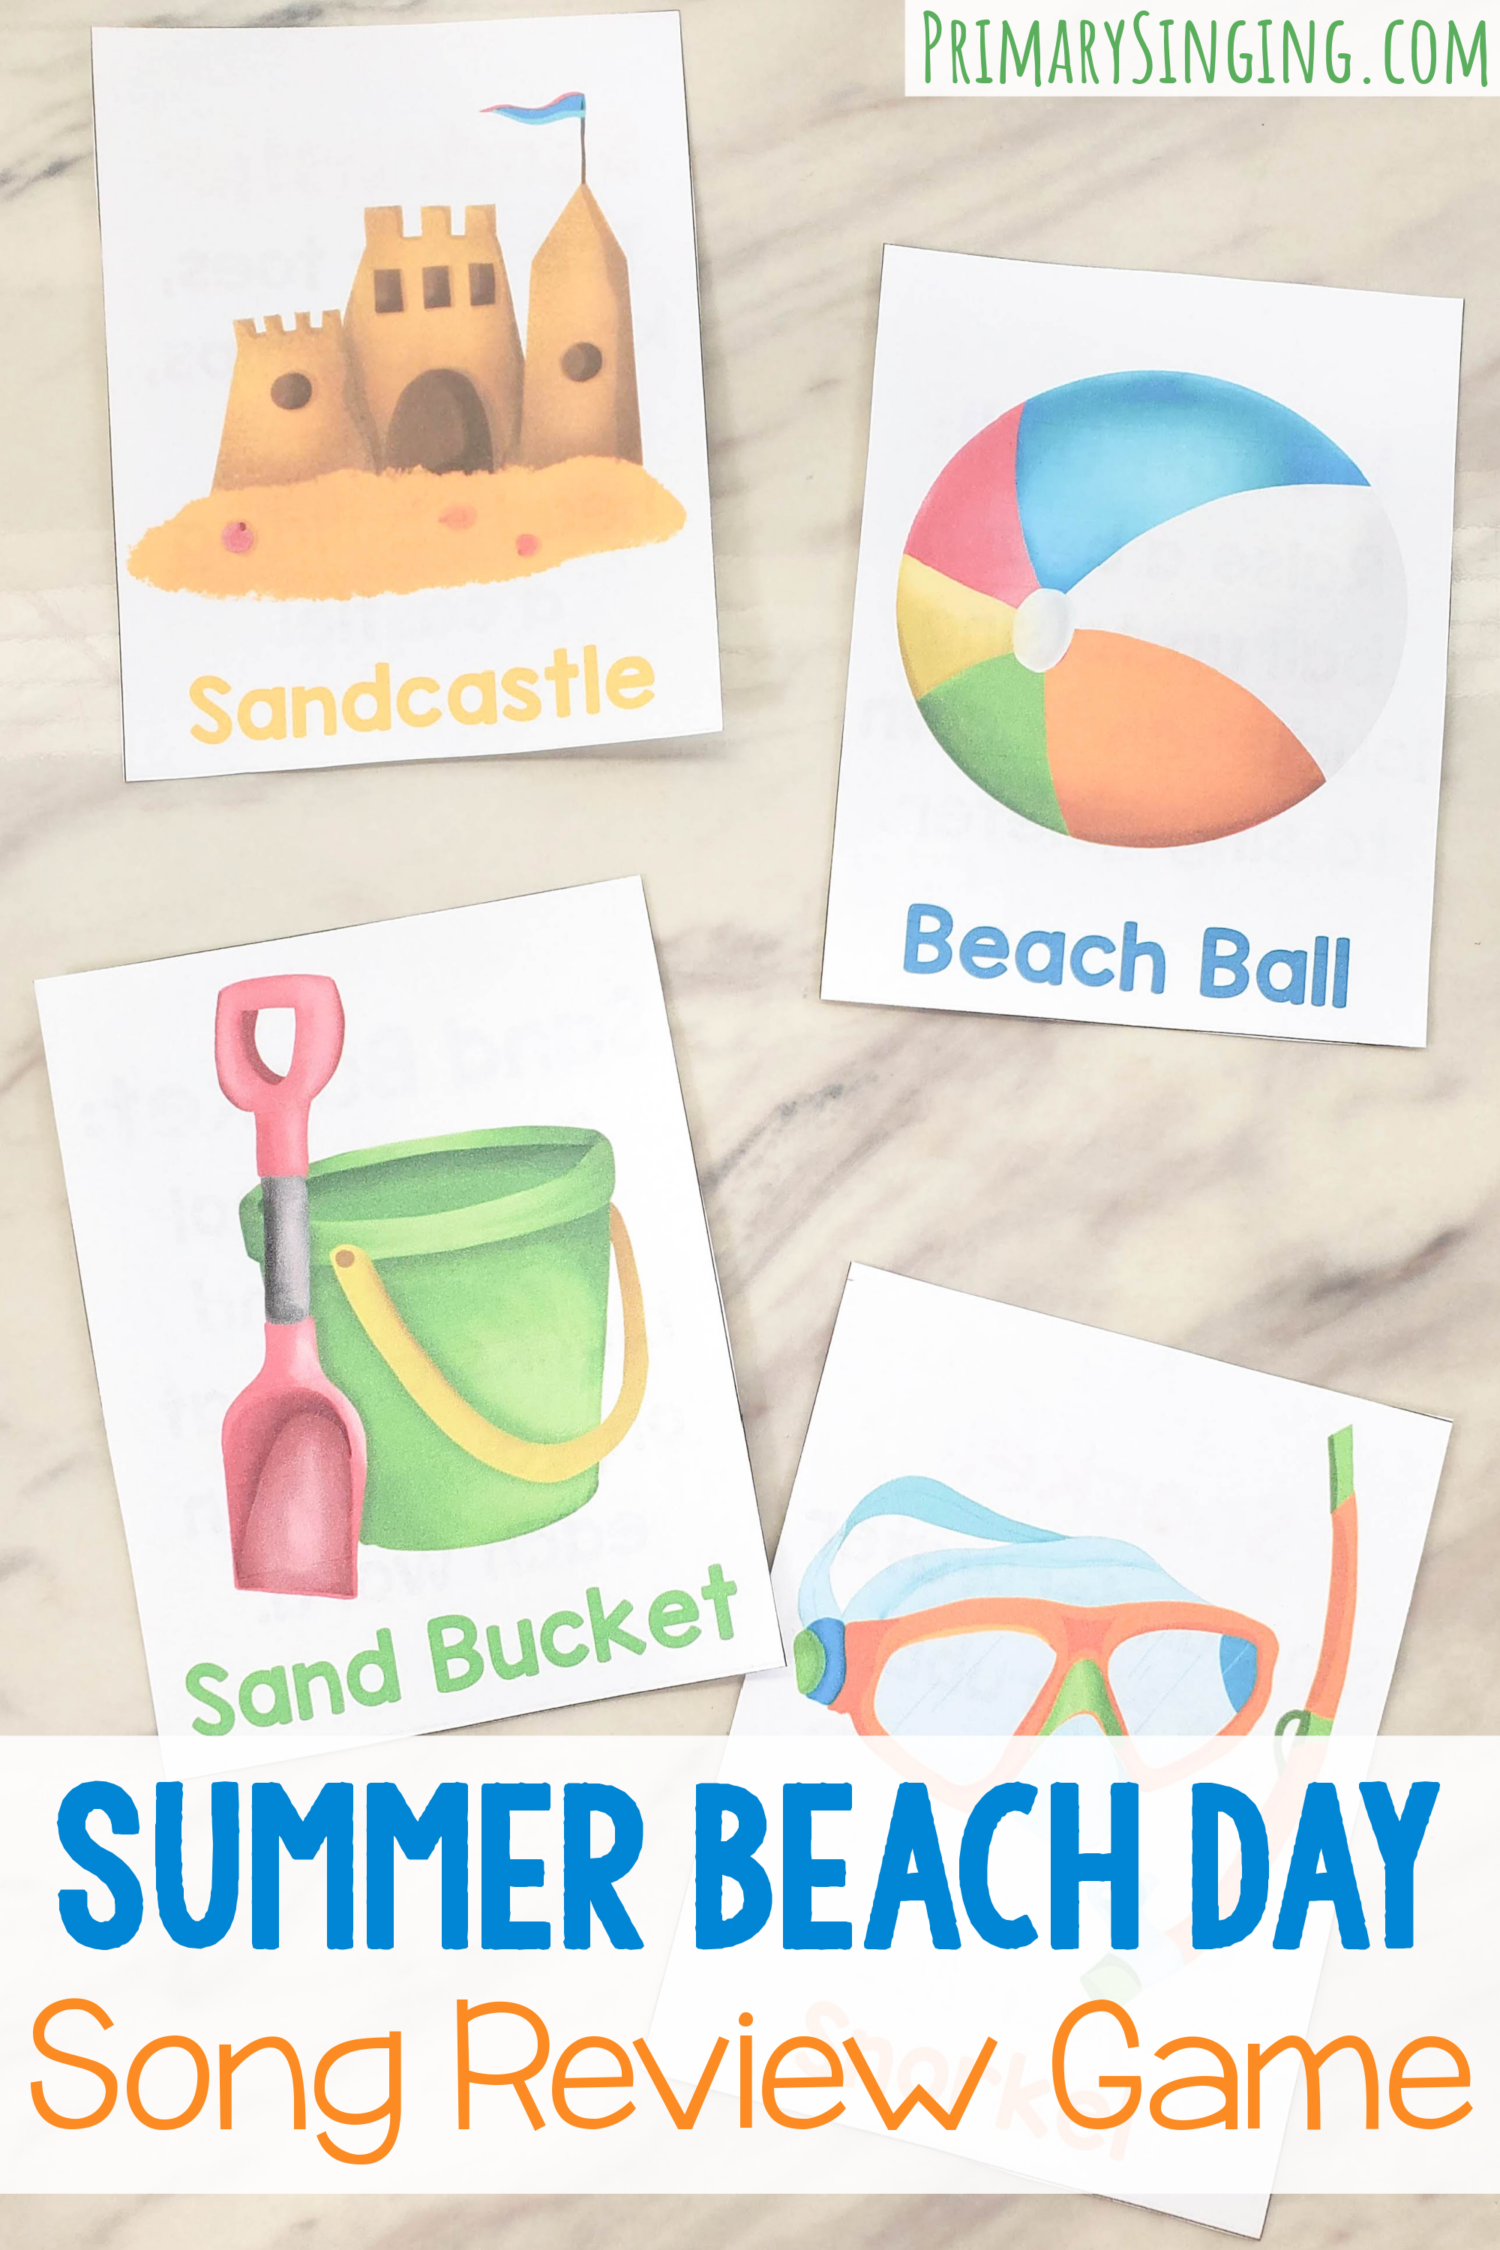 Summer Beach Day singing time song review game fun activity perfect for summertime! Help create a beach scene as you practice each of the songs learned so far this year. With printable song helps for LDS Primary music leaders.